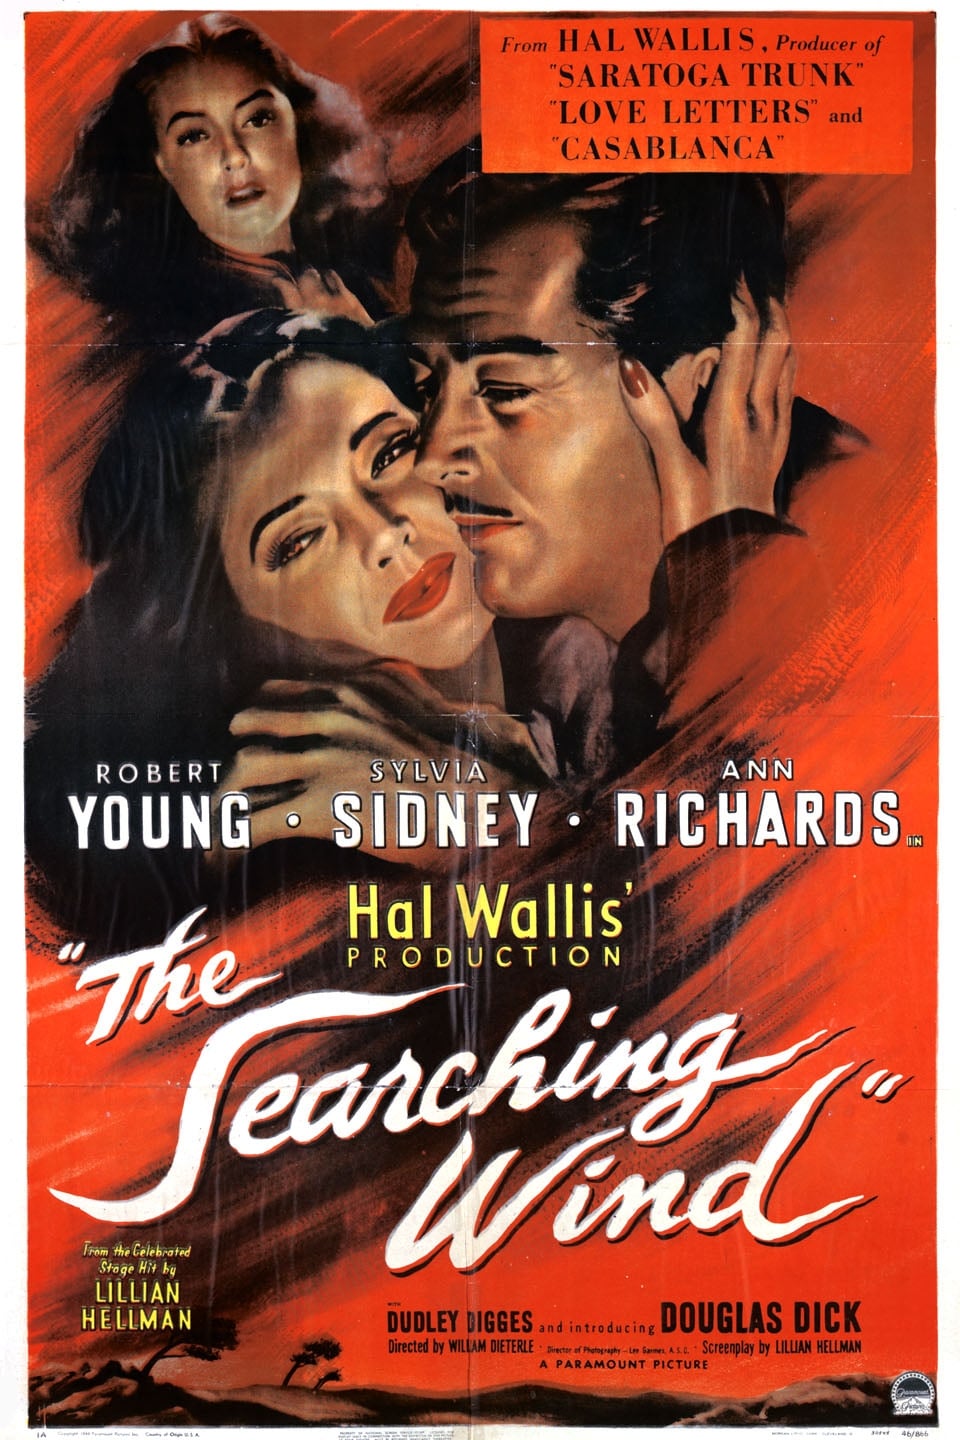 The Searching Wind (1946)